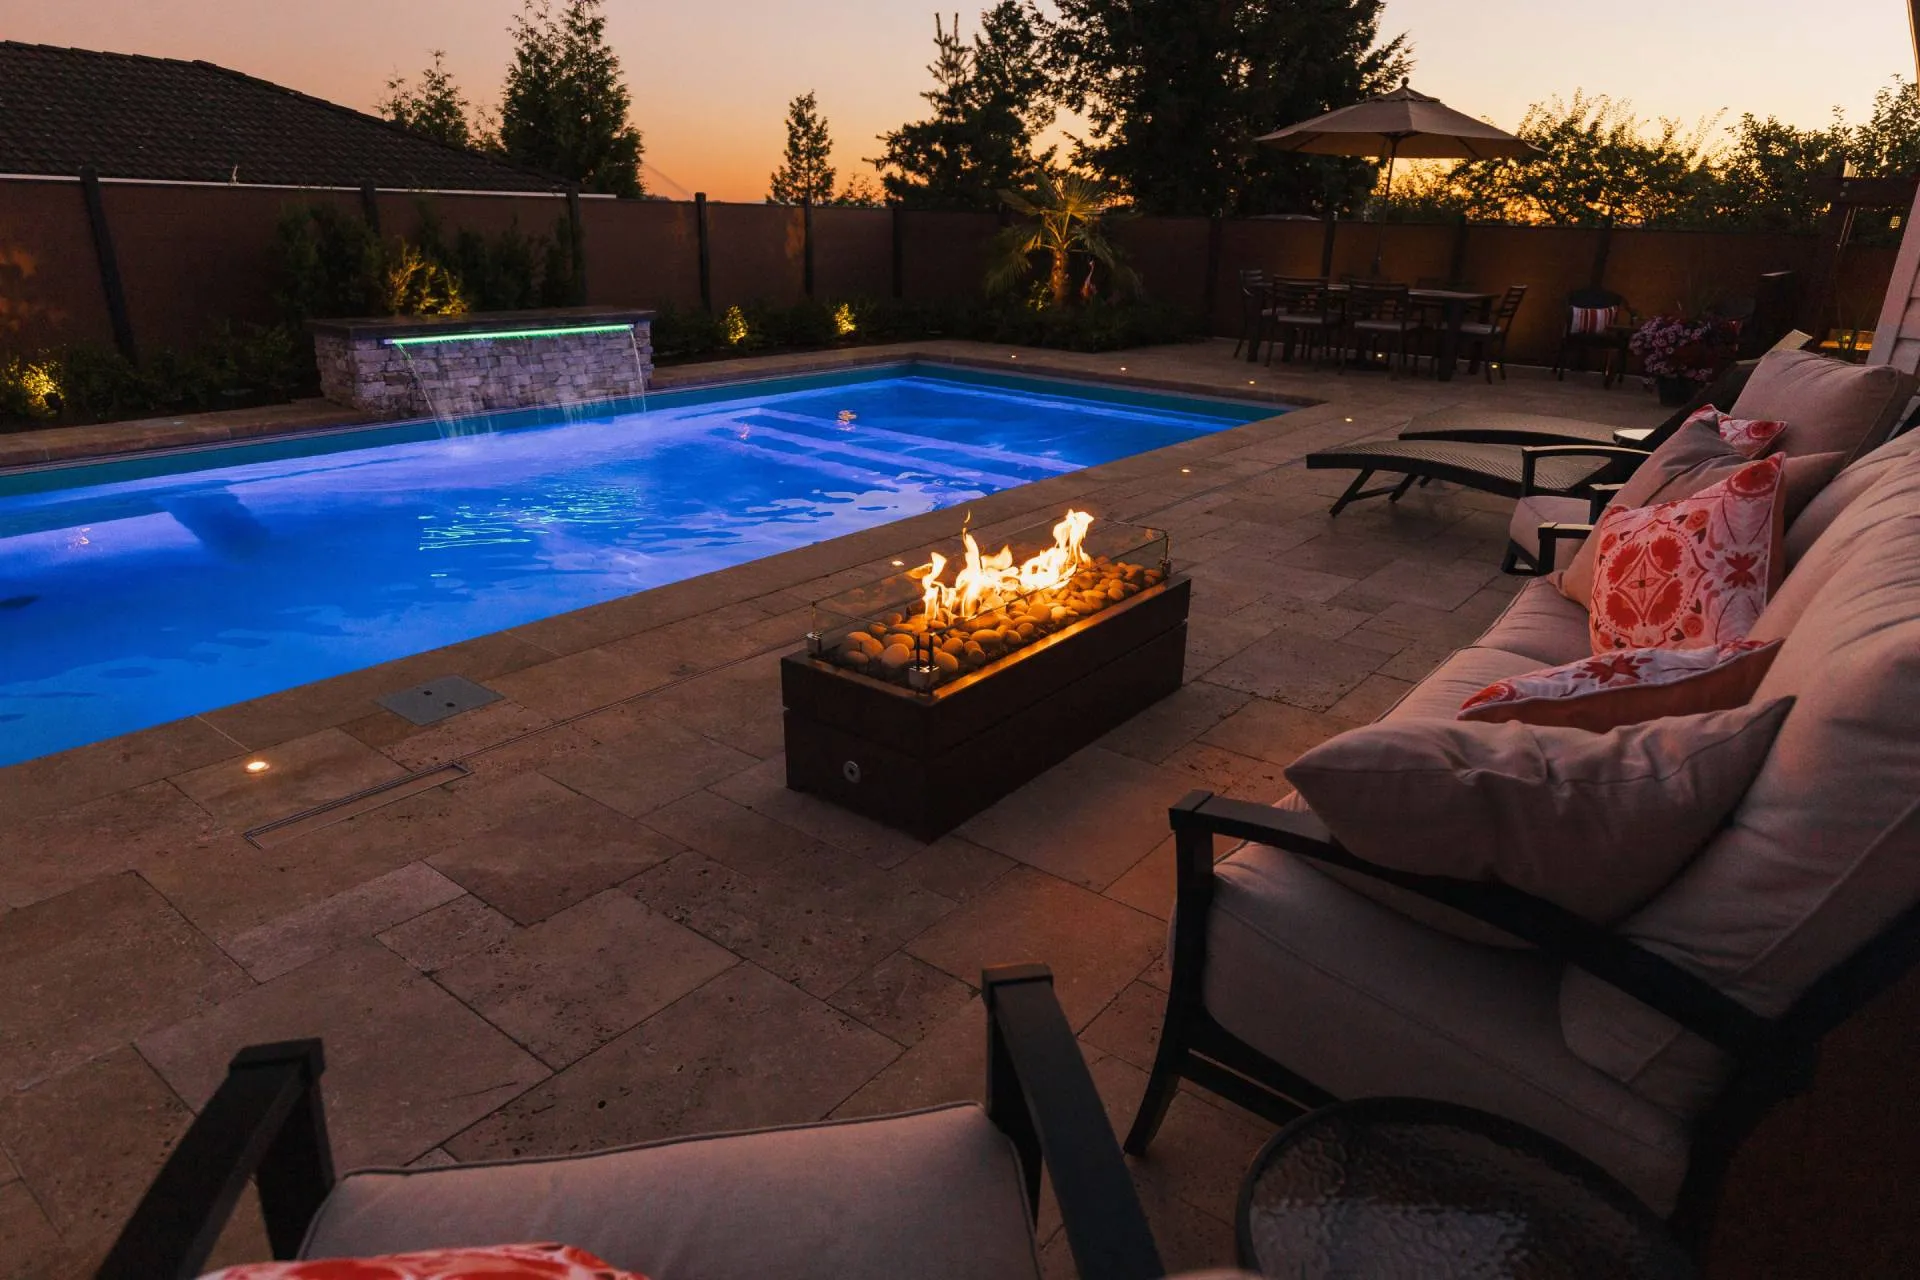 Image of an outdoor pool with an outdoor fireplace and several chairs